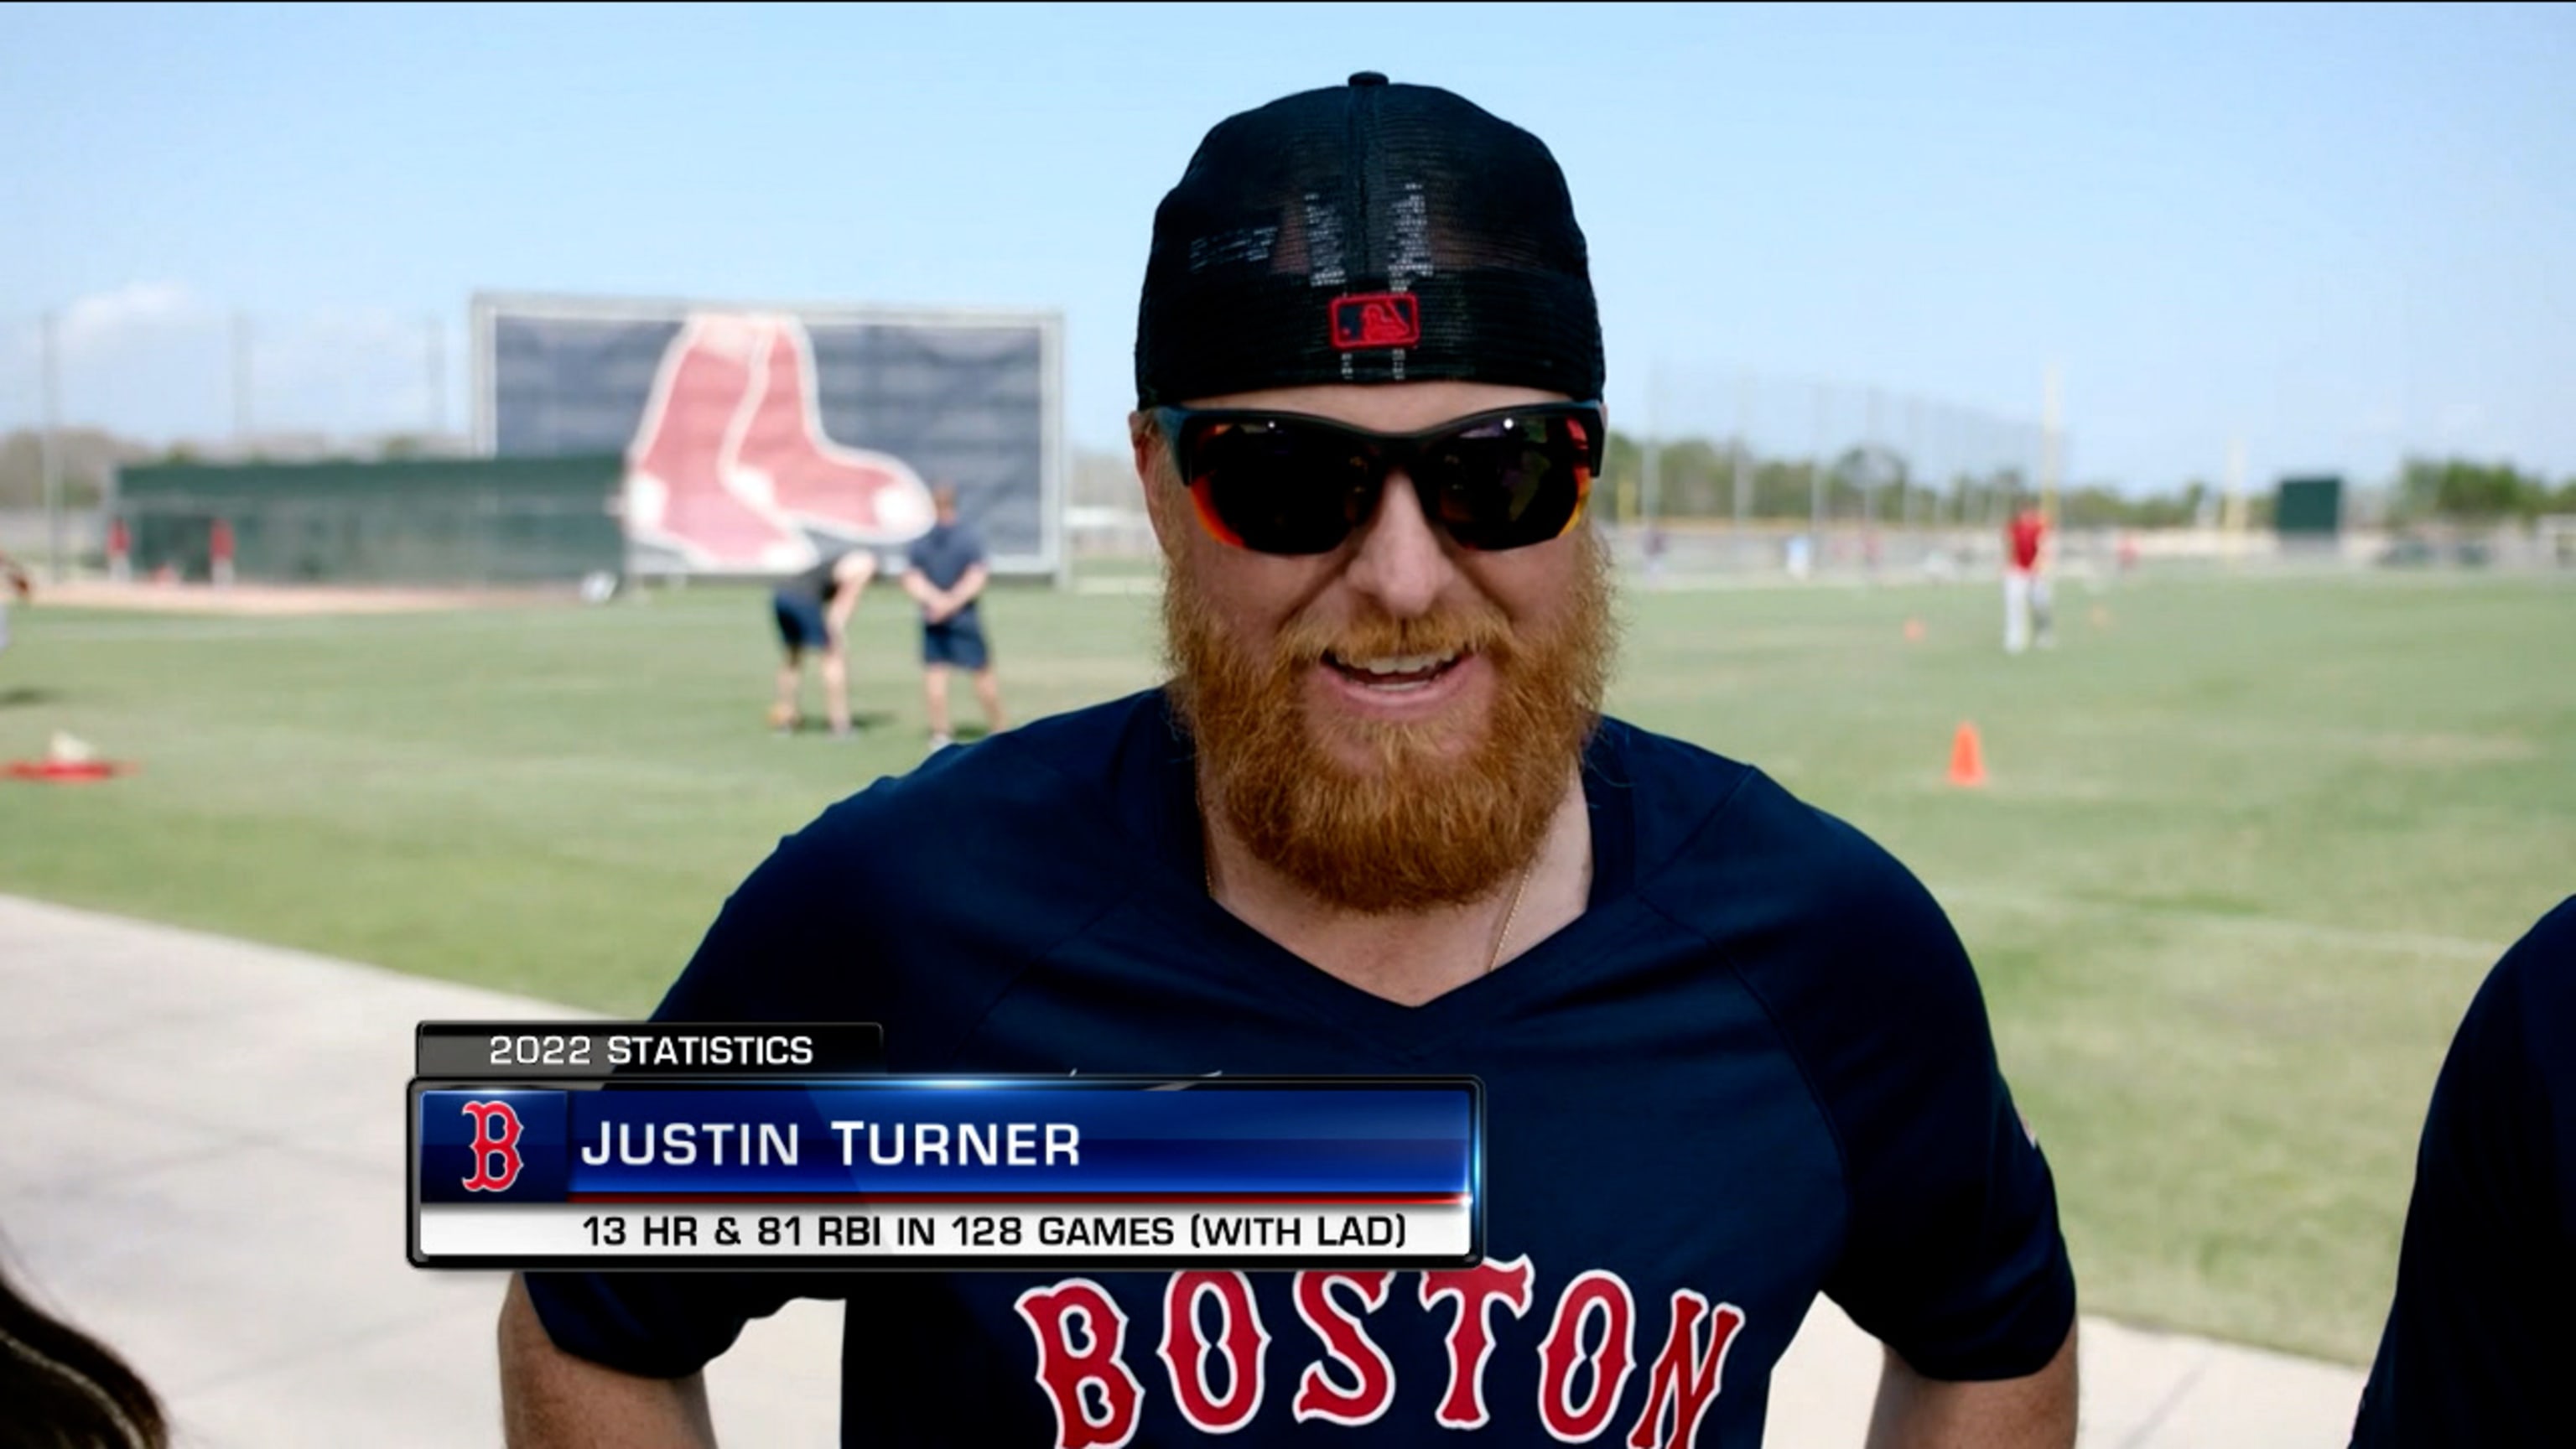 Justin Turner Boston Red Sox Youth Gold City Connect Name & Number T-Shirt